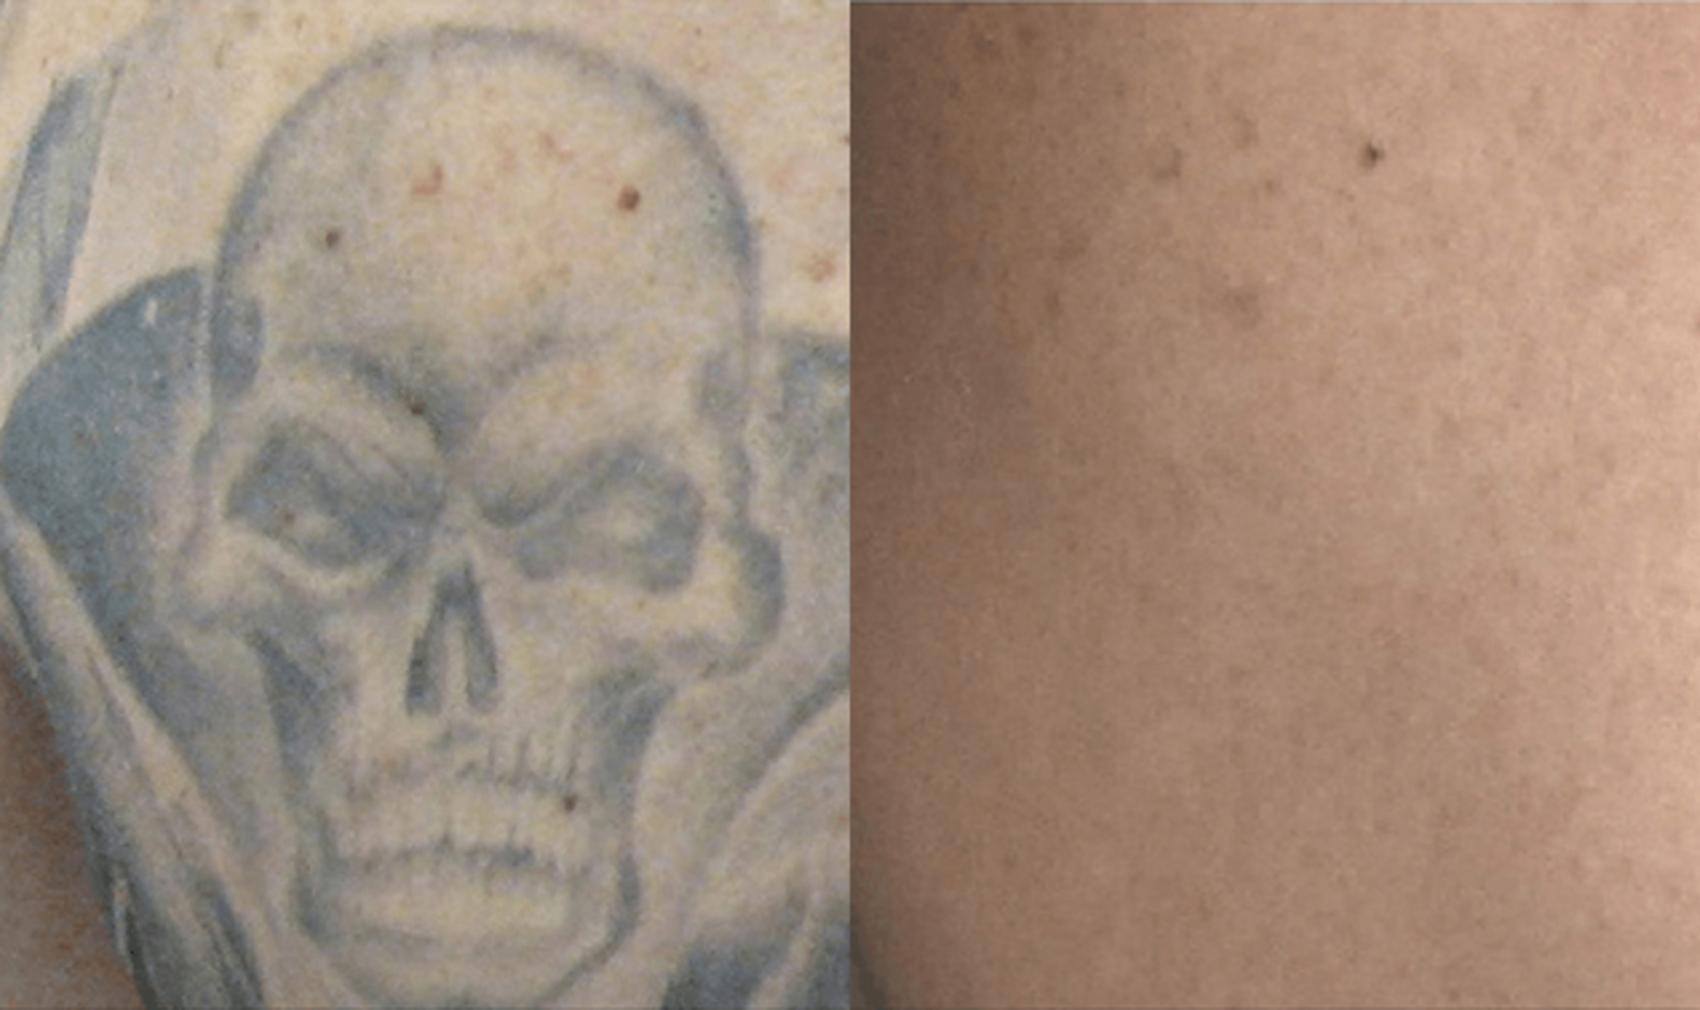 Tattoo Removal Chicago | Tattoo Removal Cost Chicago